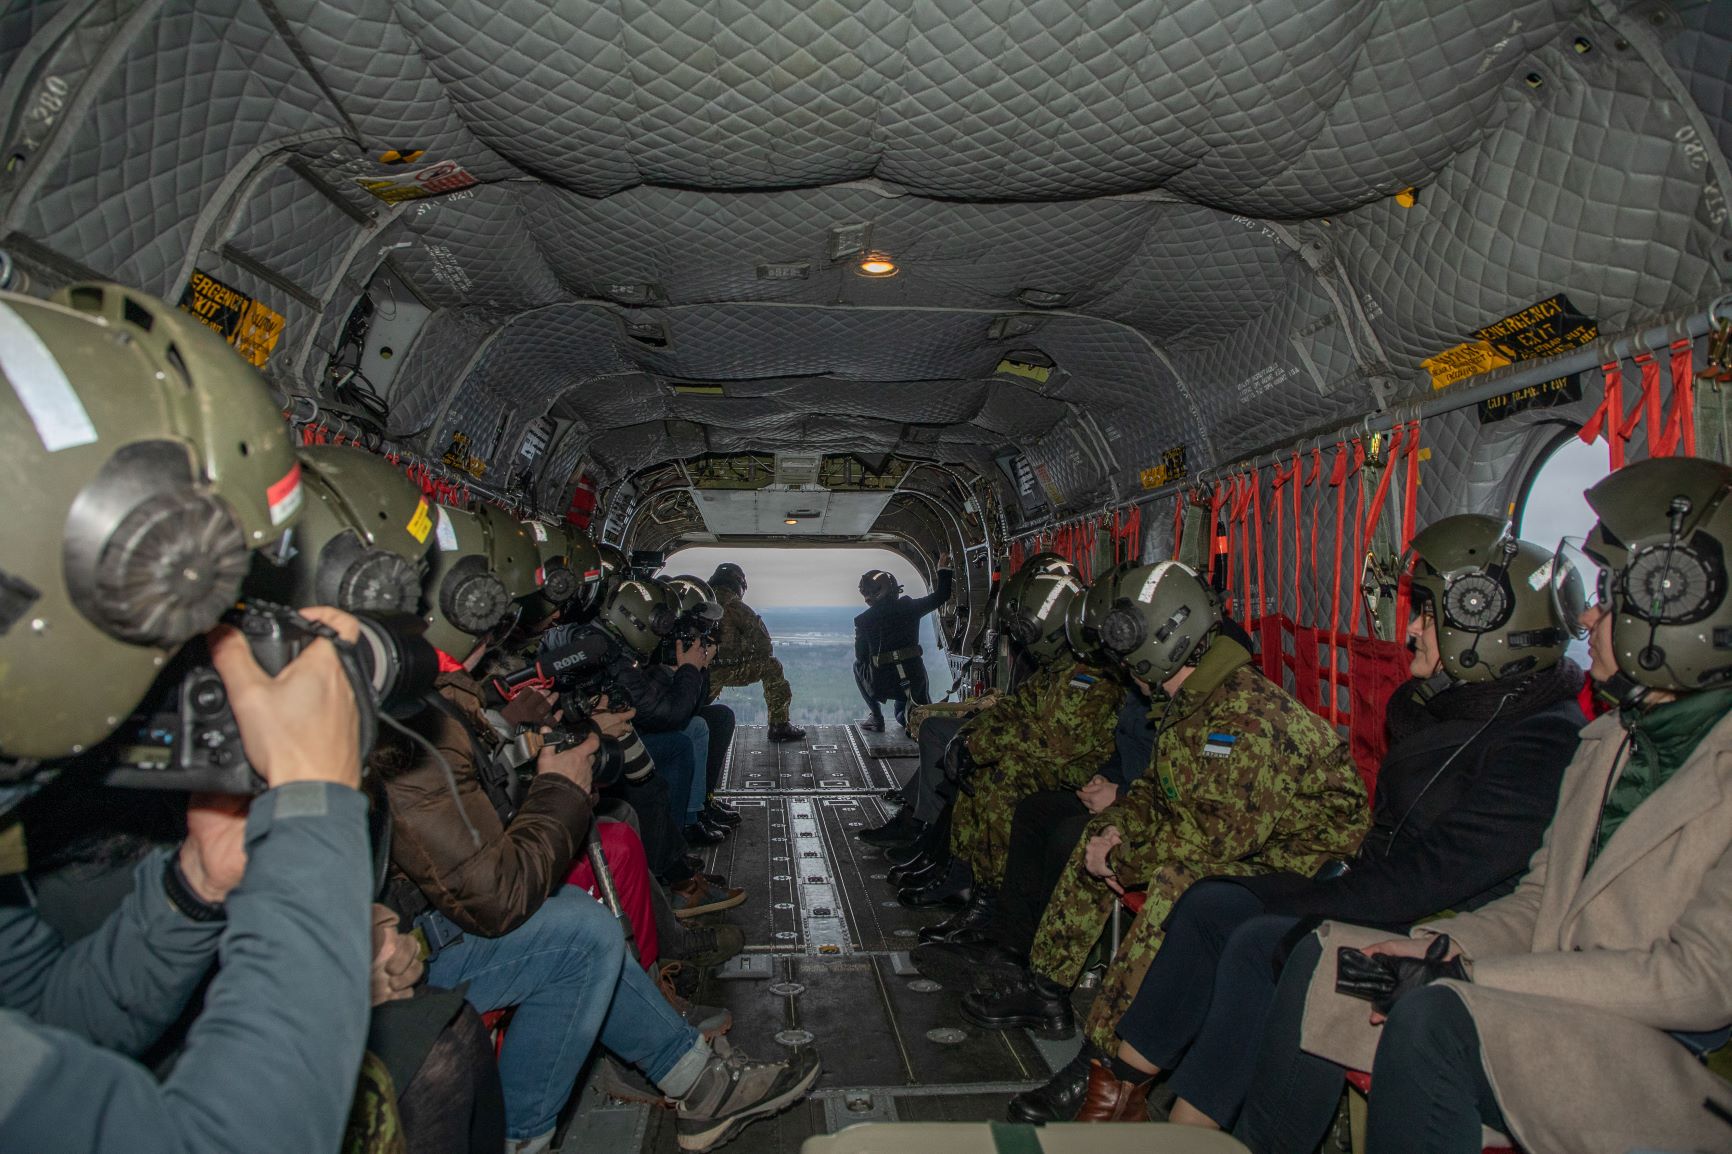 Image shows RAF aviators inside a Chinook, looking towards the open loading bay. 